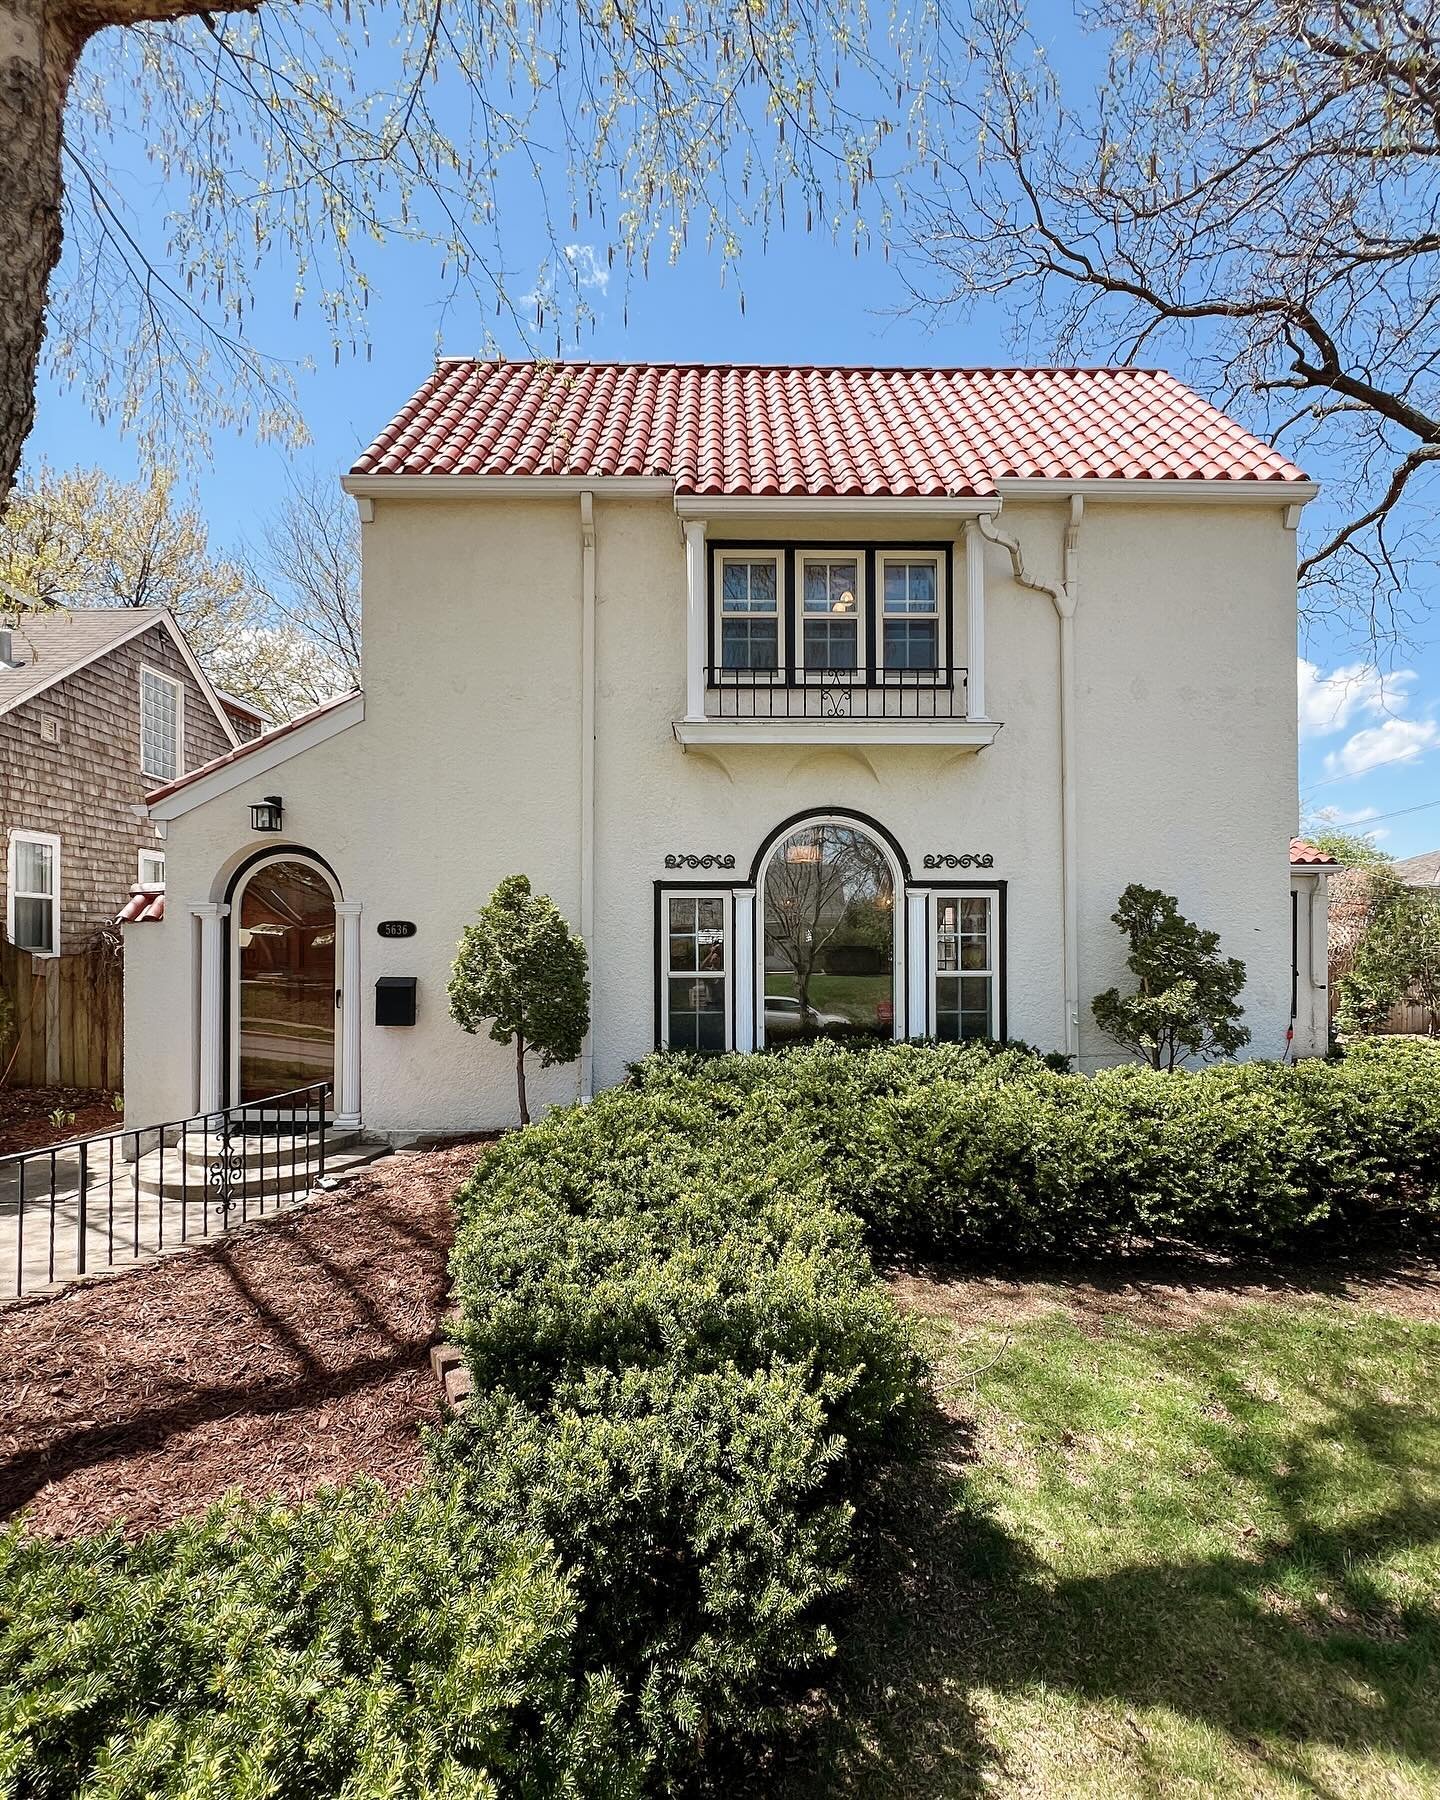 1934 Mediterranean style home in the Wenonah neighborhood of Minneapolis, MN. Just a block from lake Nokomis. Love the arches and the peach bathroom!

Interested in finding your own home to love? Fill out my &lsquo;buy with me&rsquo; contact form in 